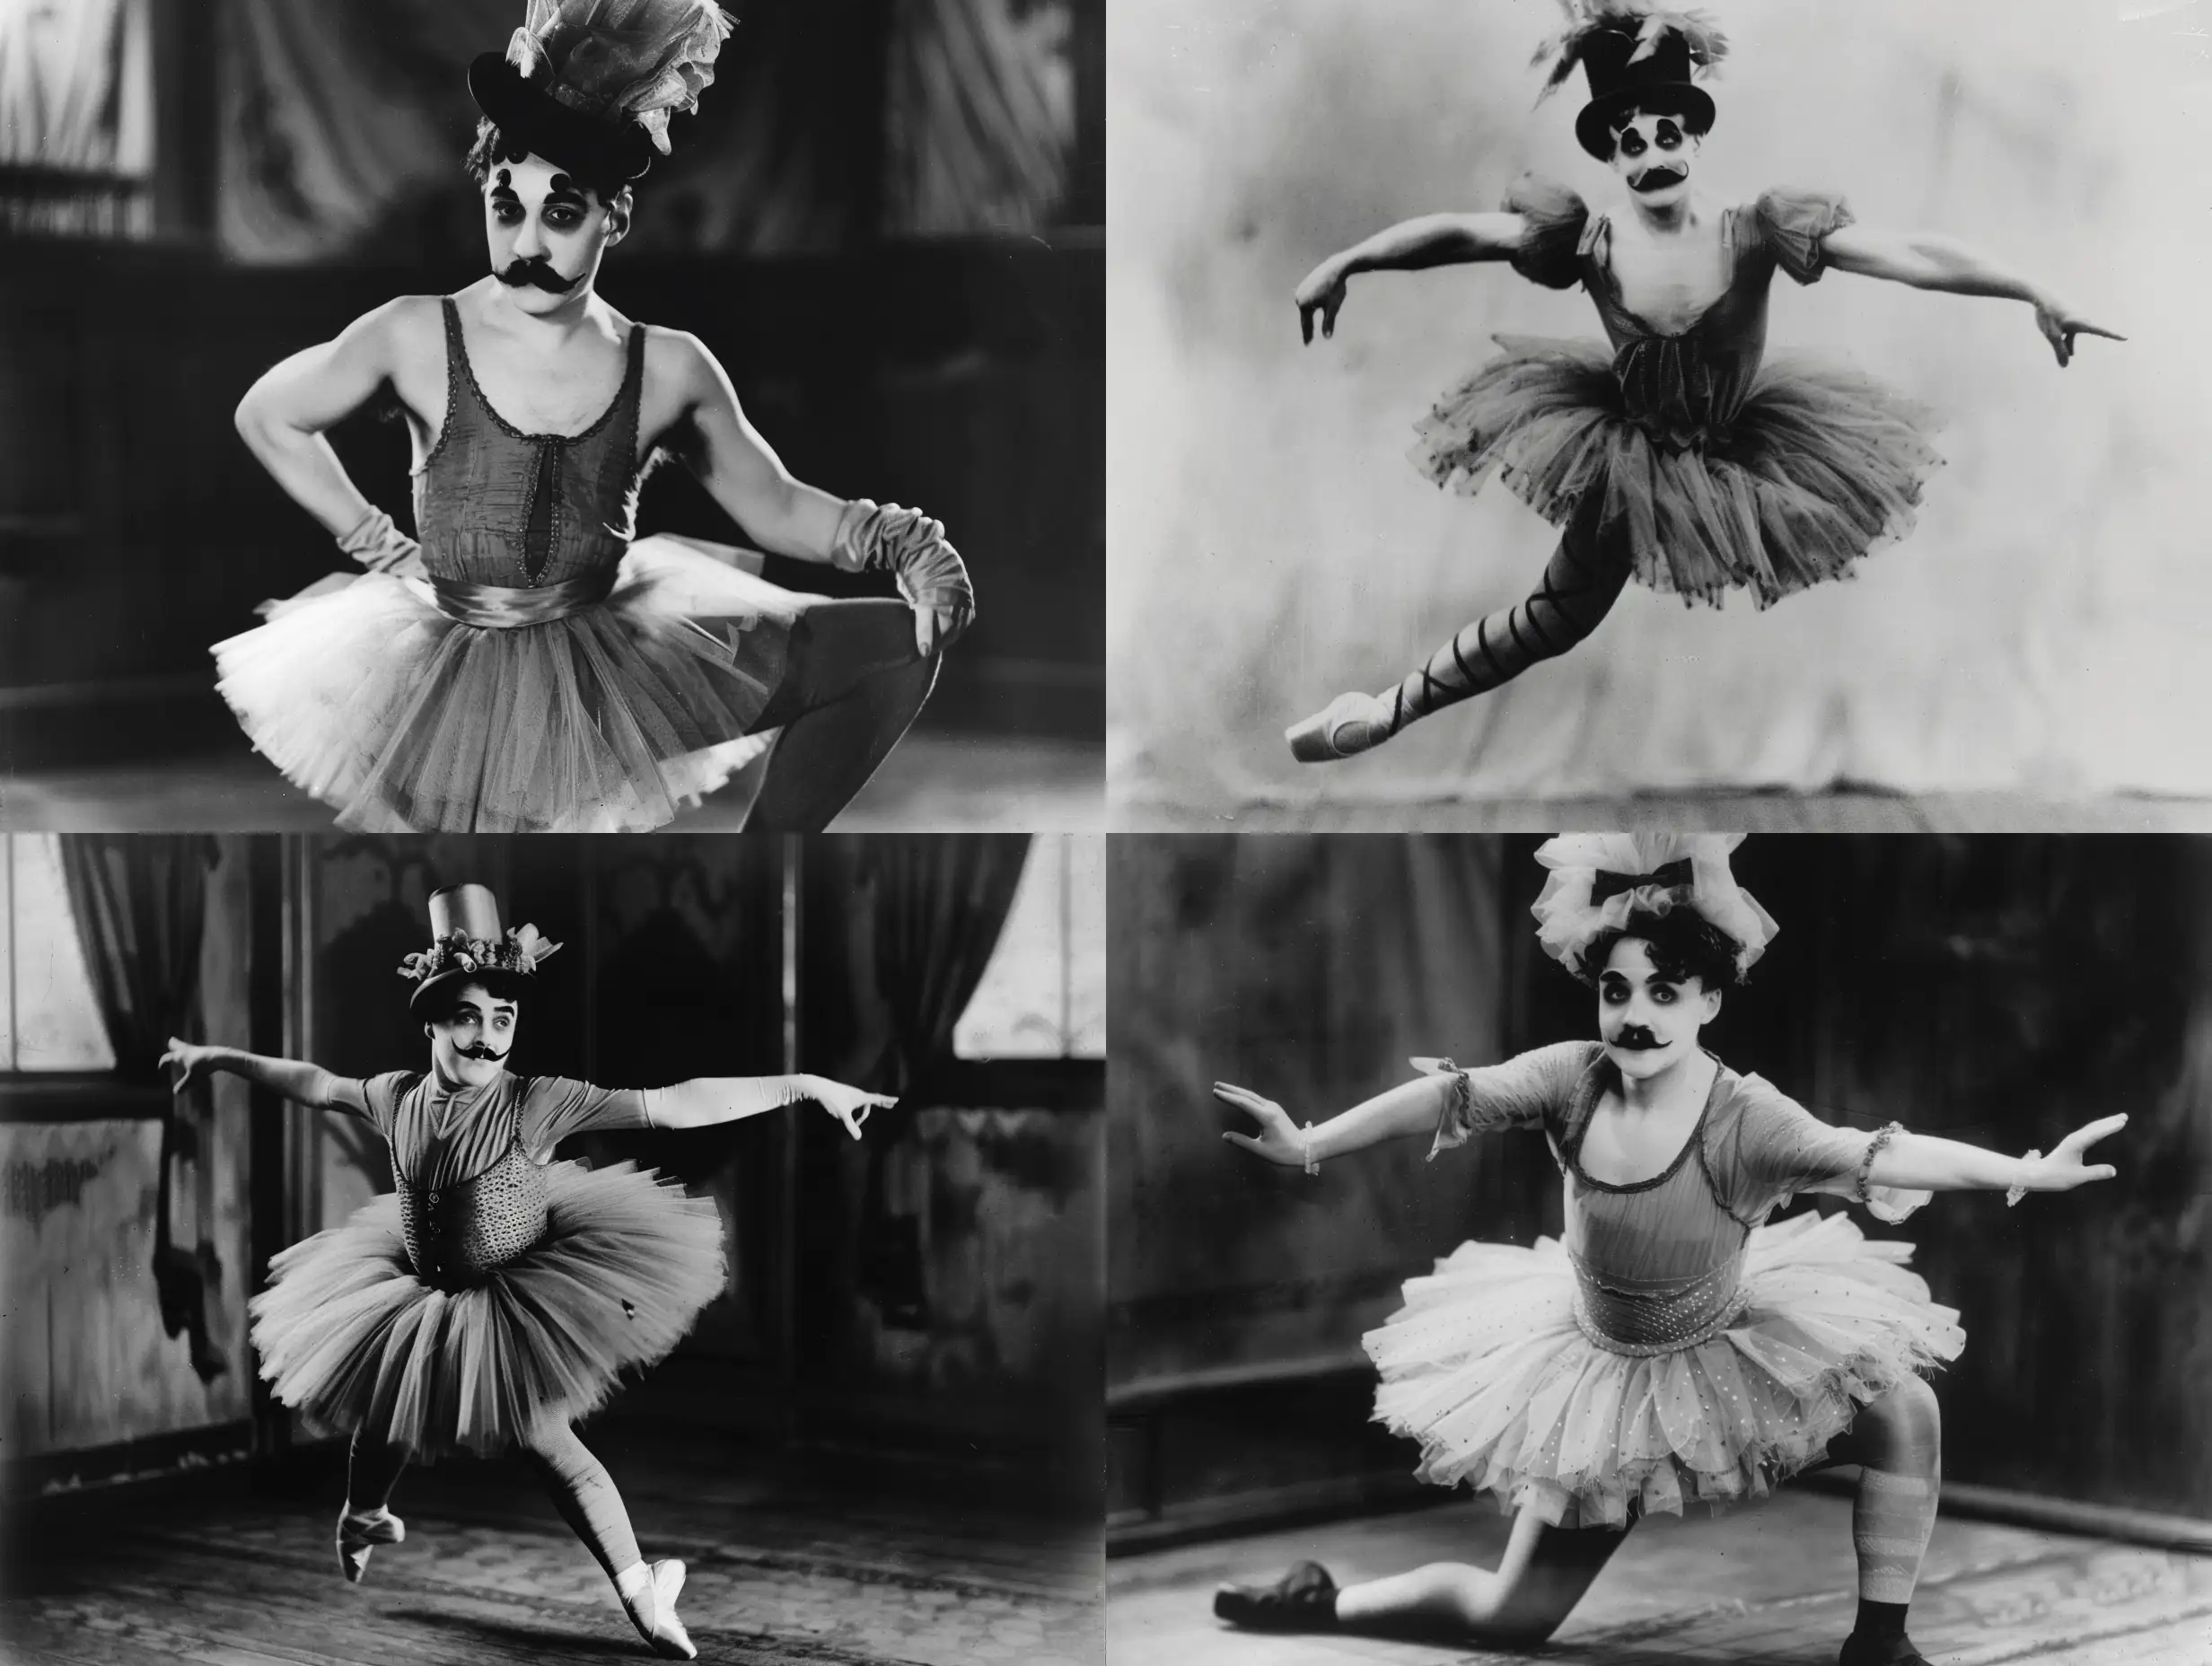 Vintage-Comedy-TutuClad-Charlie-Chaplin-Attempting-Ballet-in-1920s-Style